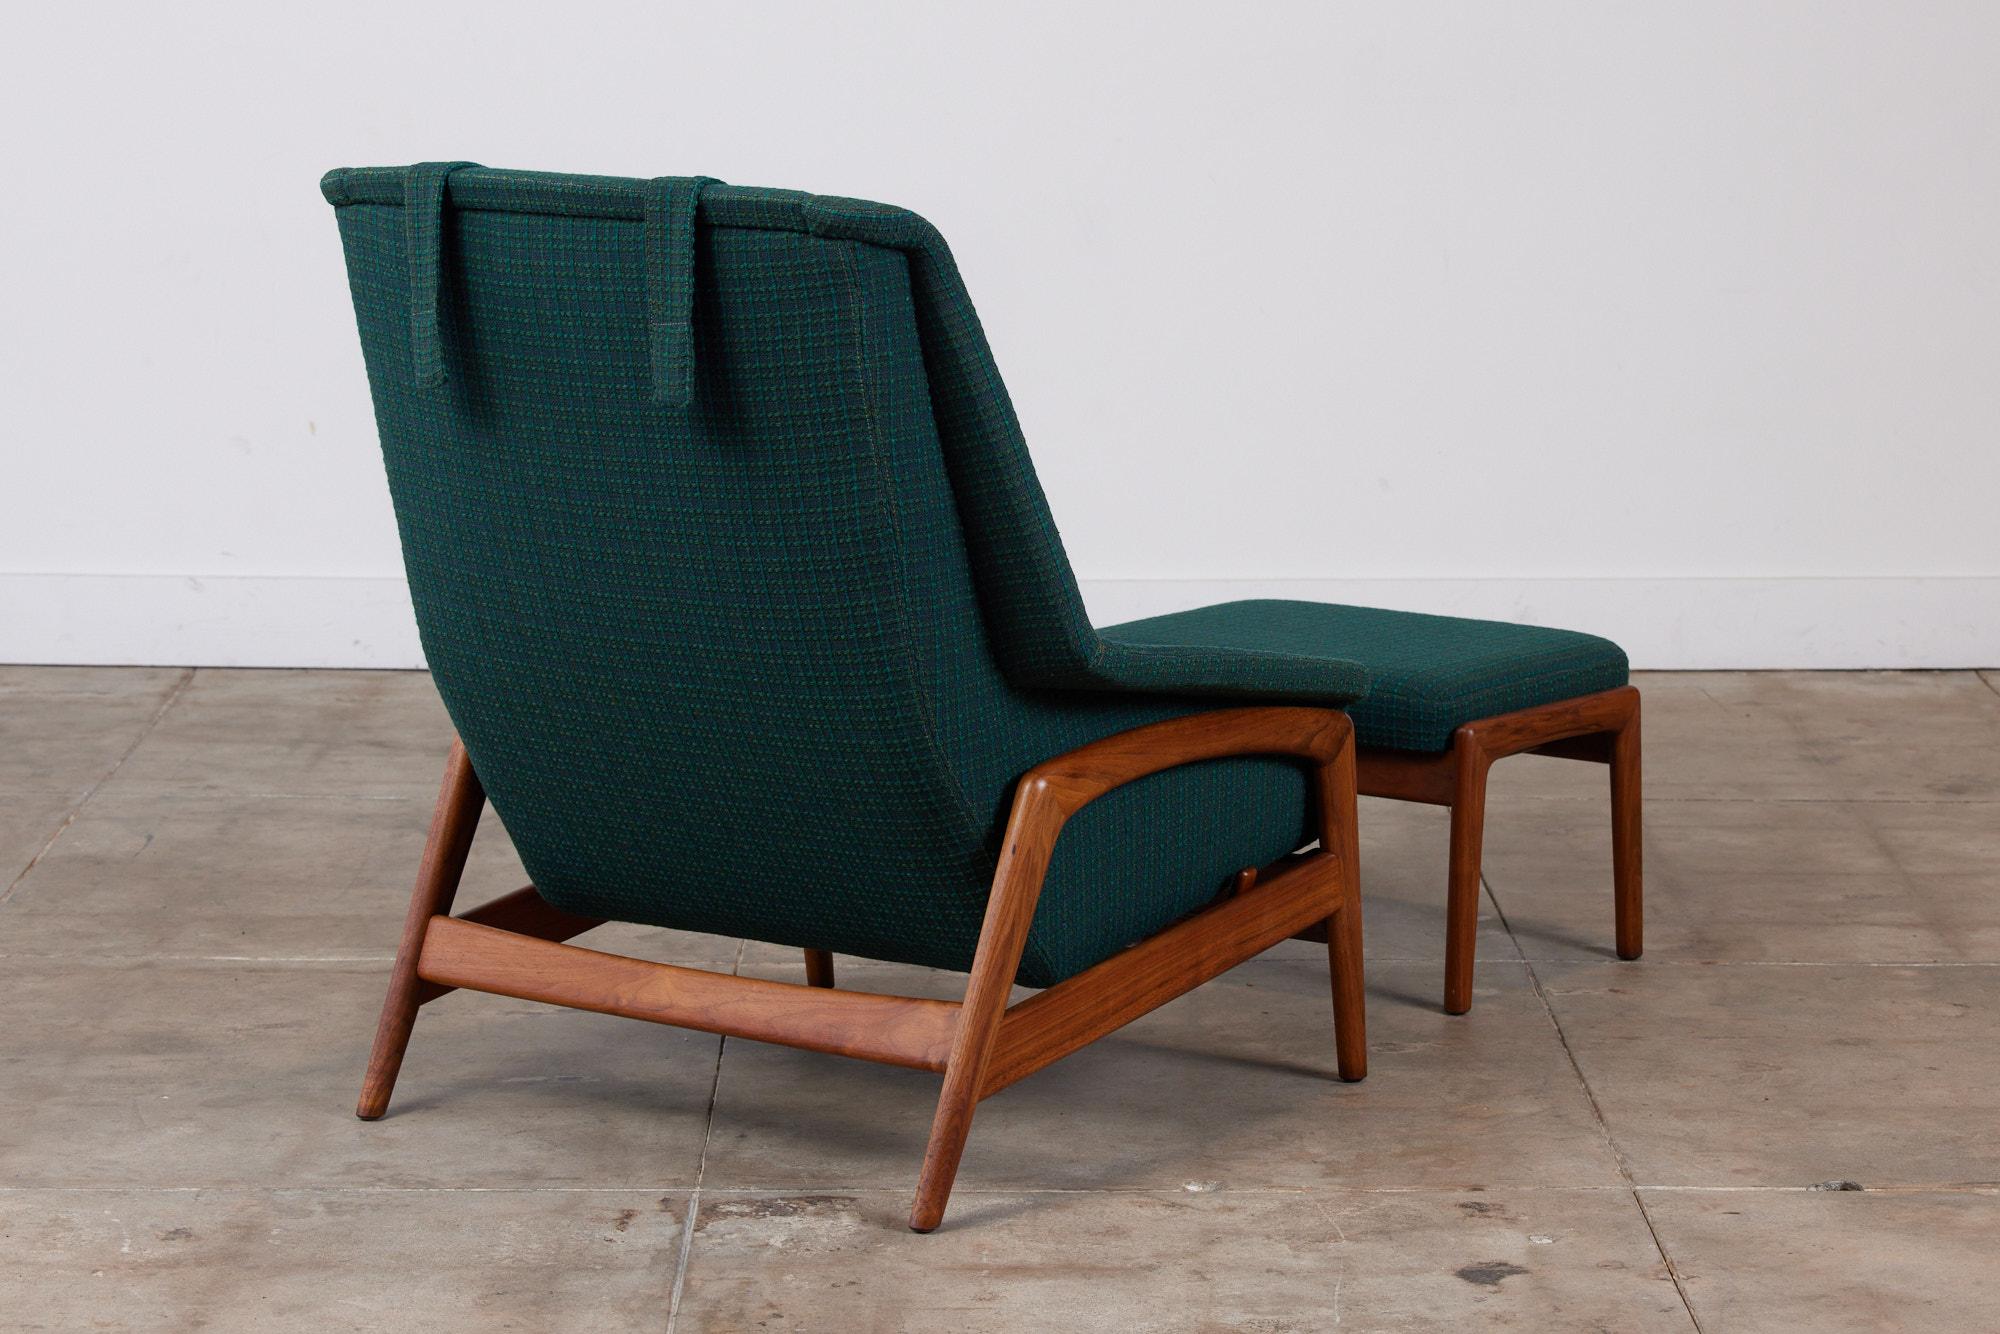 Mid-20th Century Folke Ohlsson Lounge Chair and Ottoman for DUX